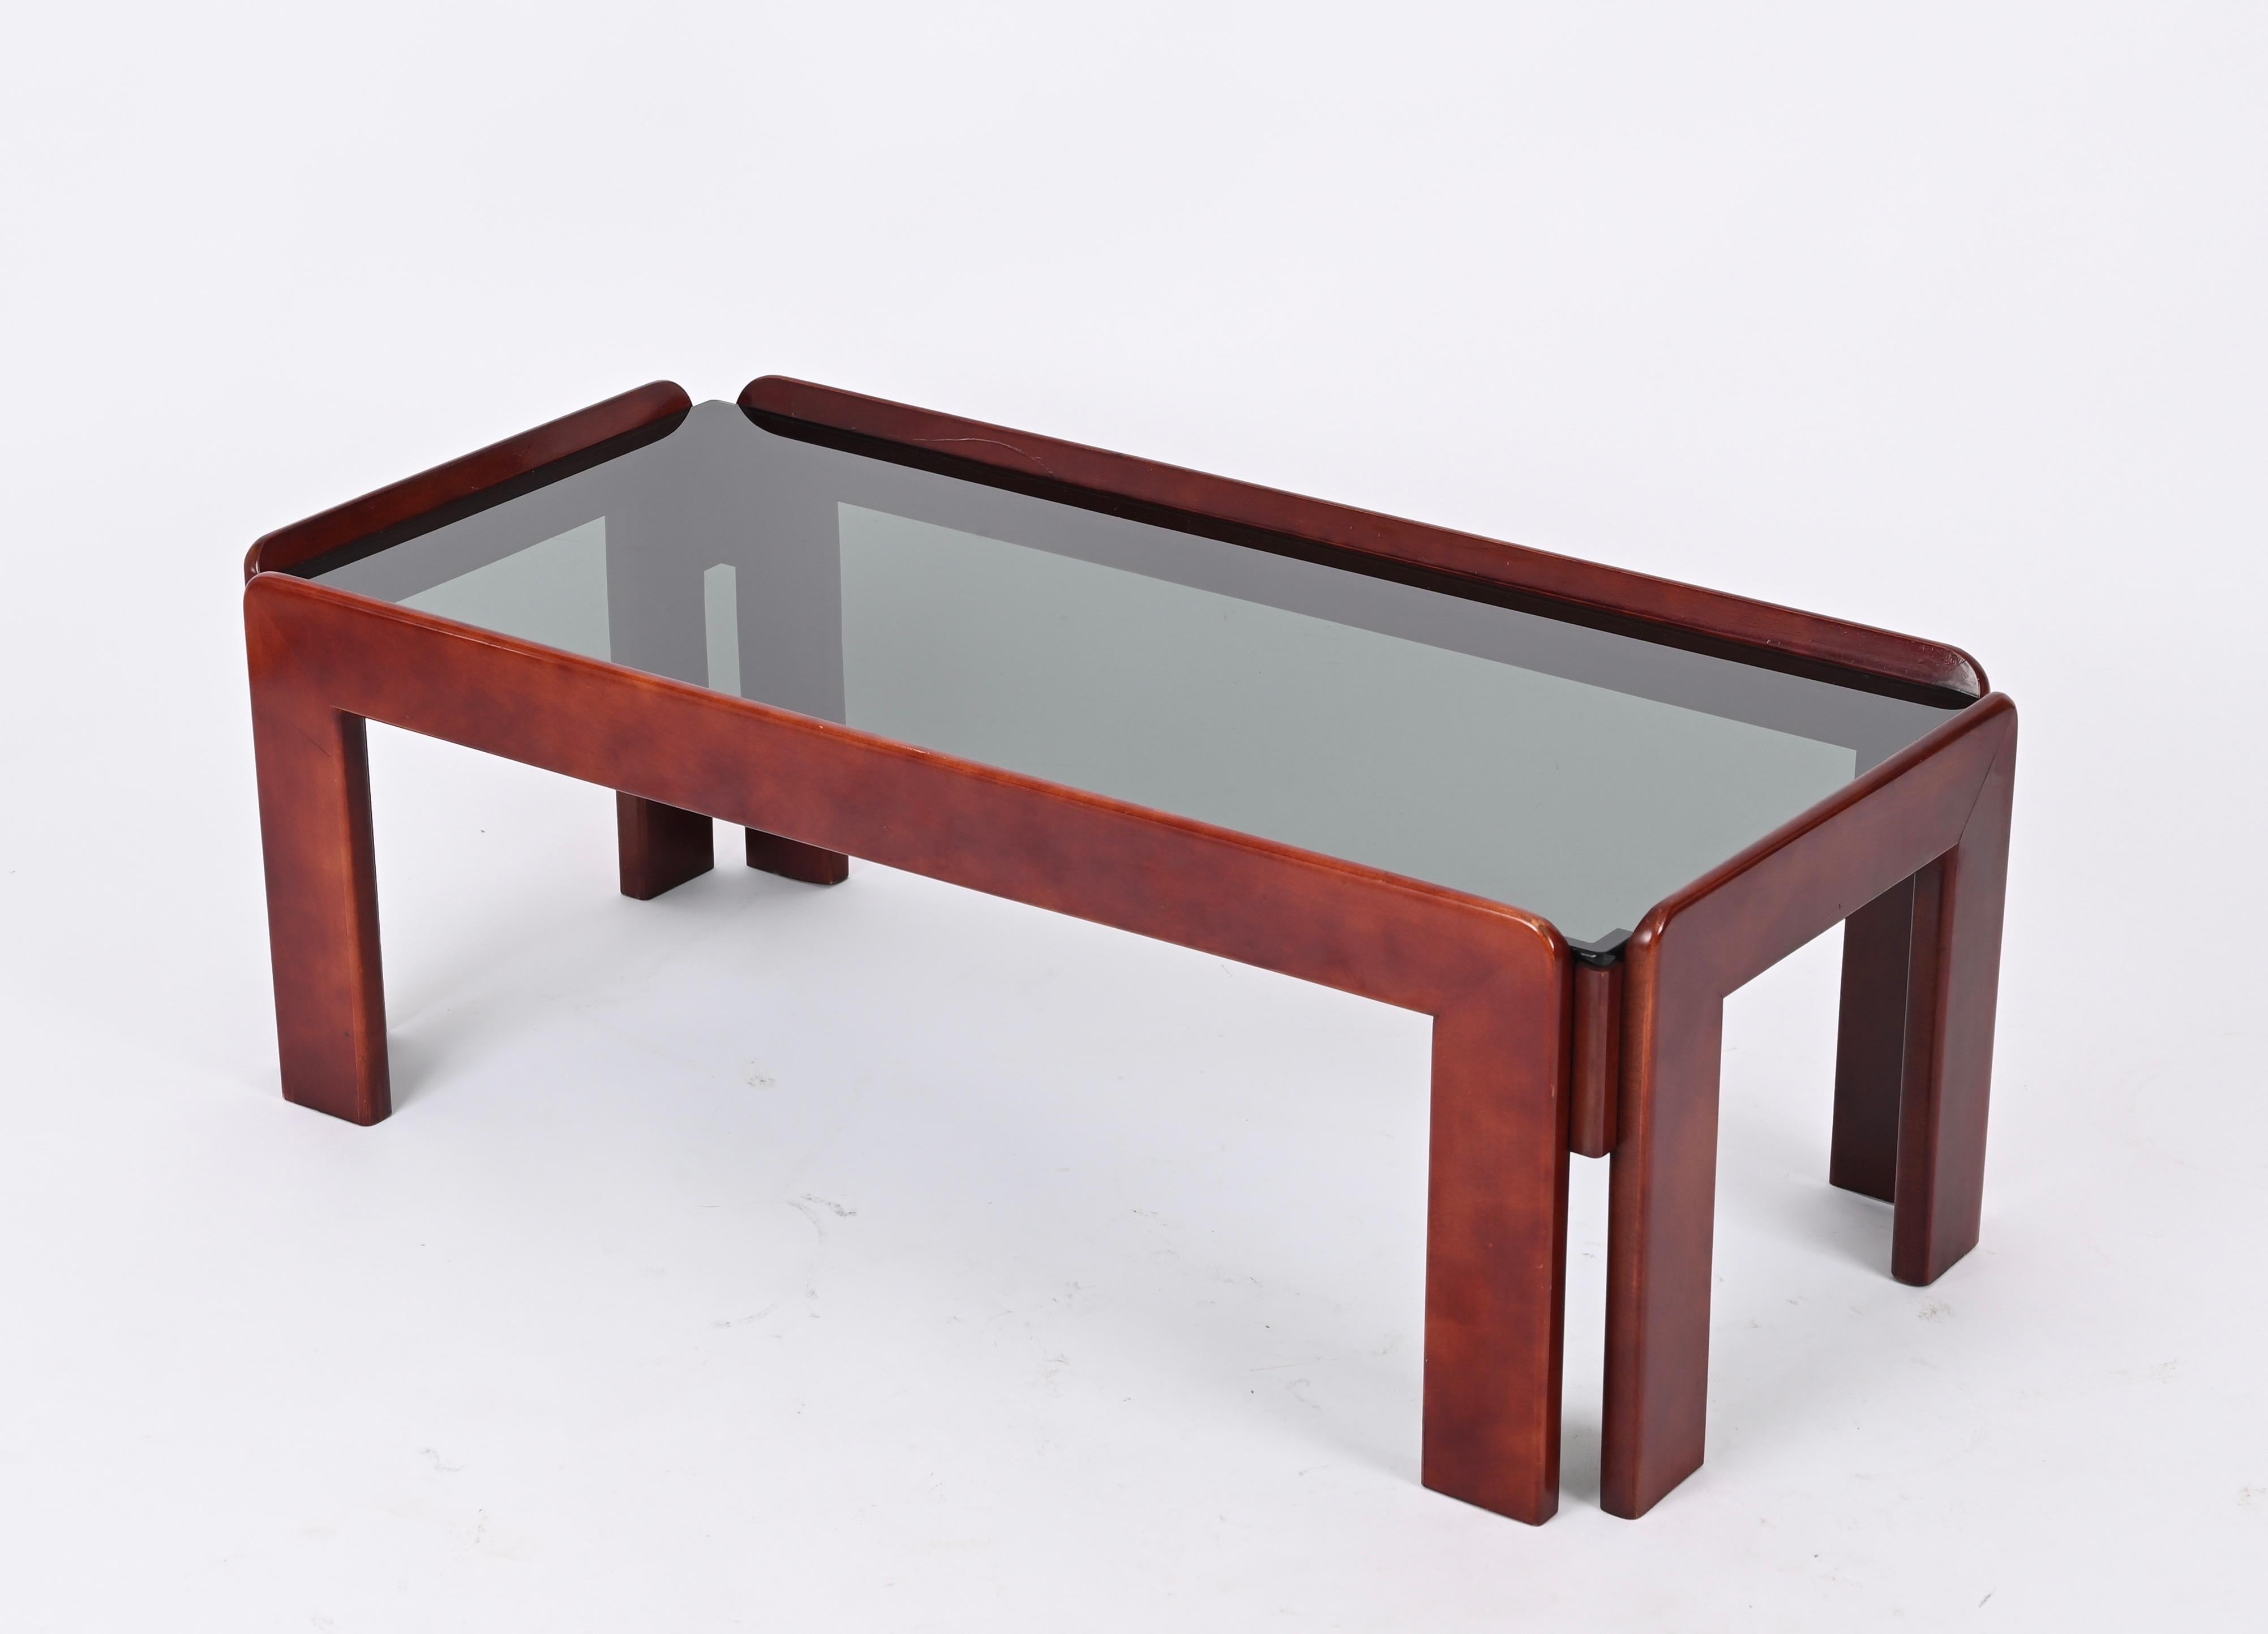 Glass Afra & Tobia Scarpa Mid-Century Walnut Coffee Table for Cassina, Italy 1960s For Sale